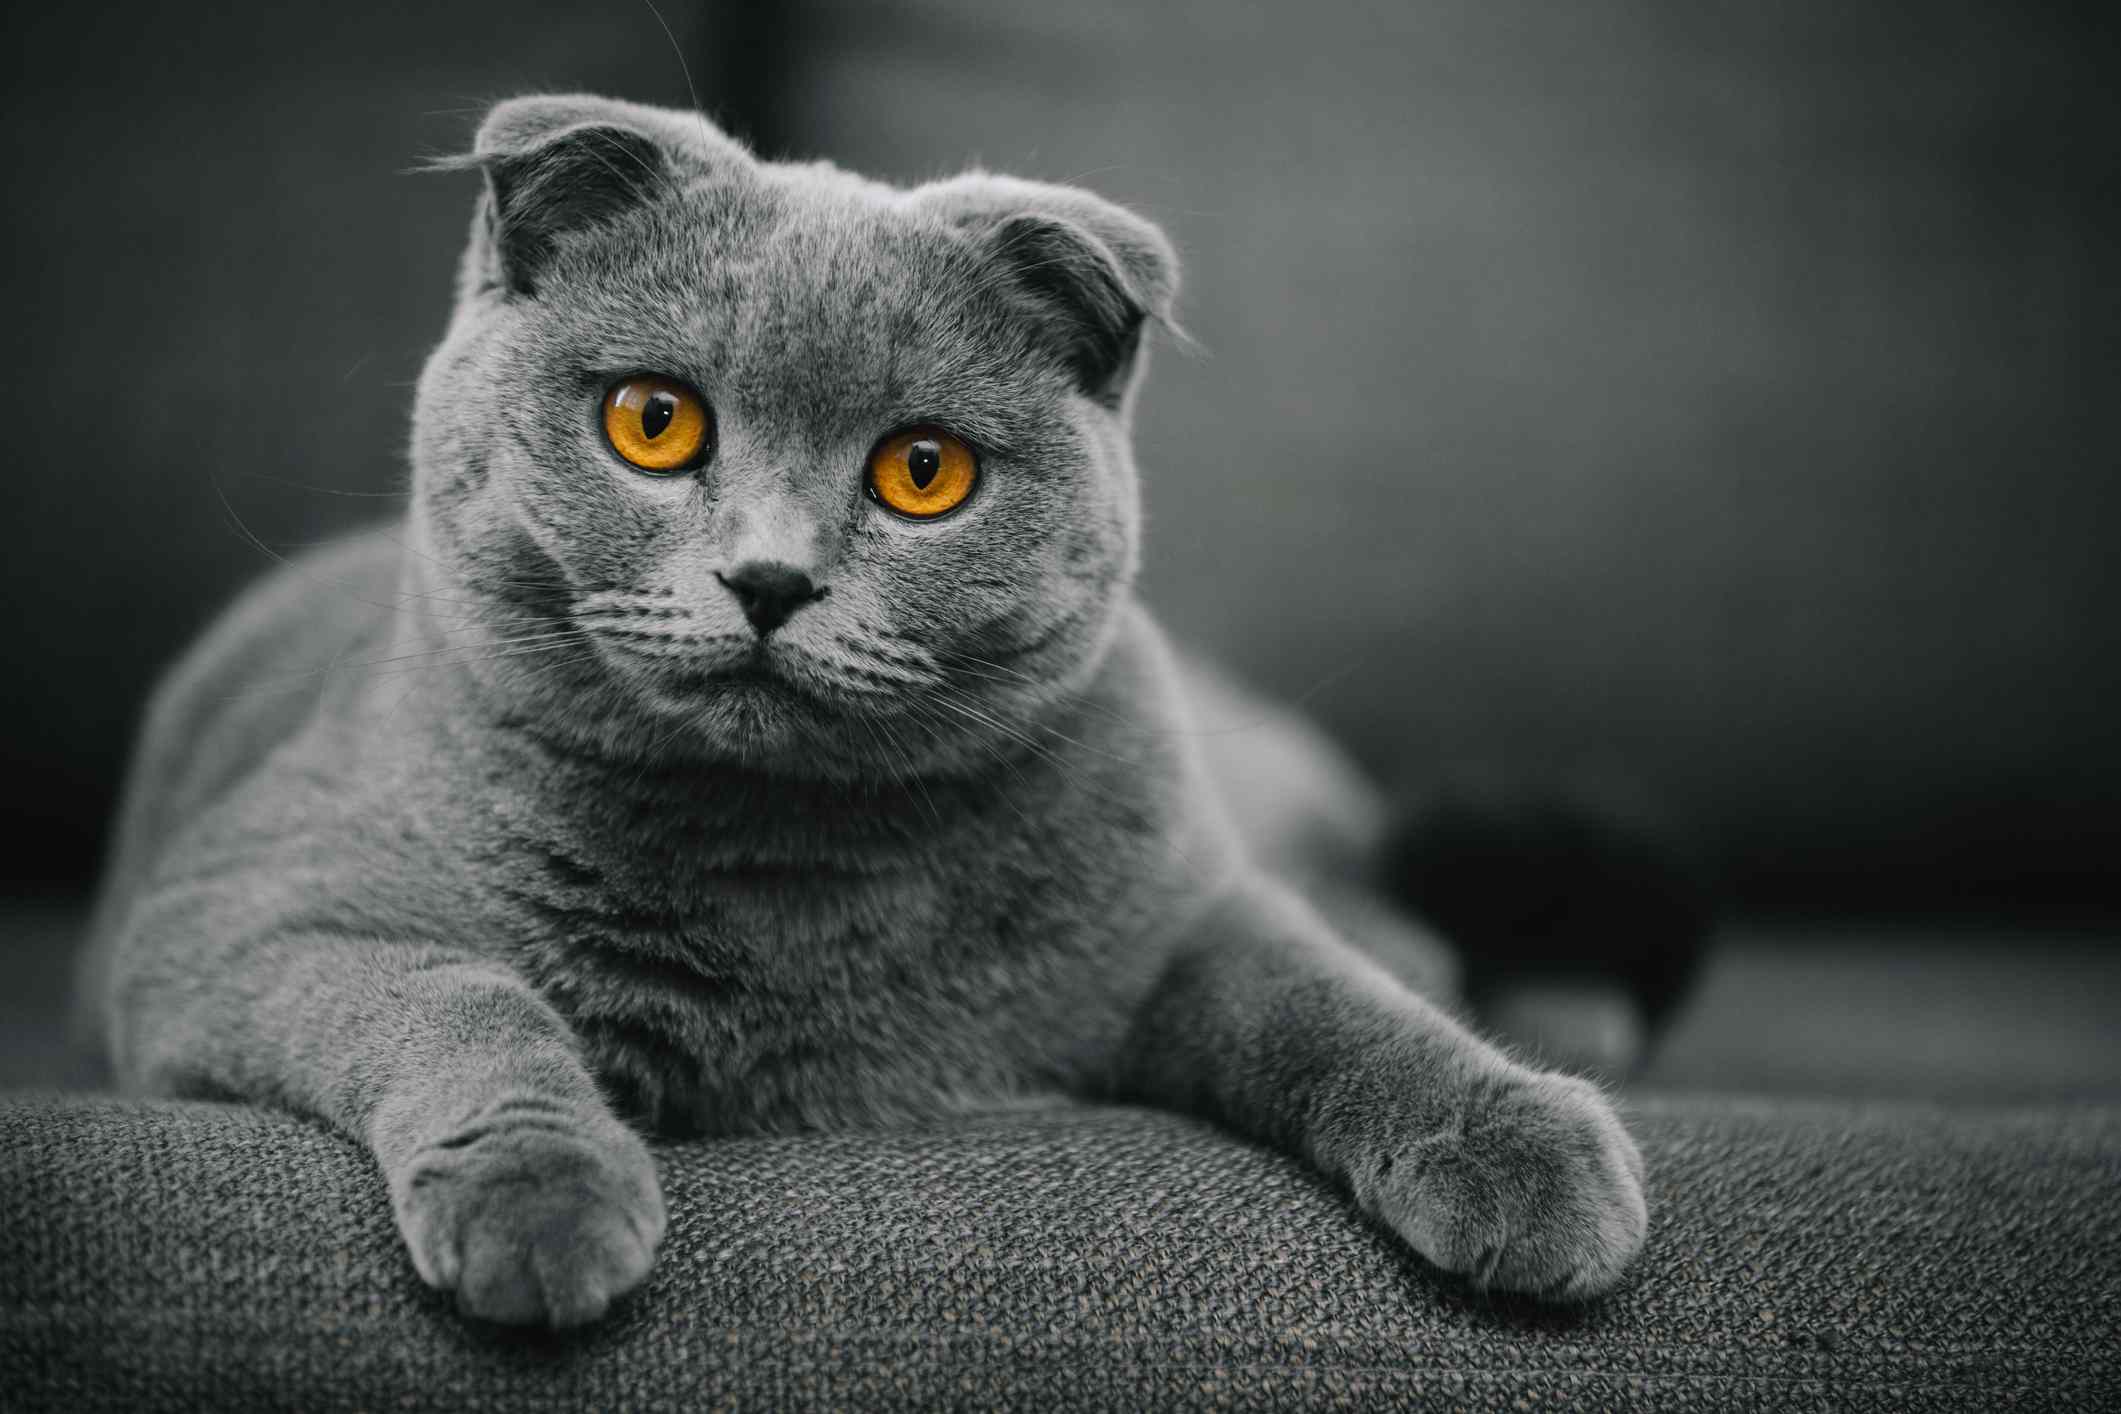 A grey Scottish Fold cat on a grey couch looking at the camera with golden eyes.